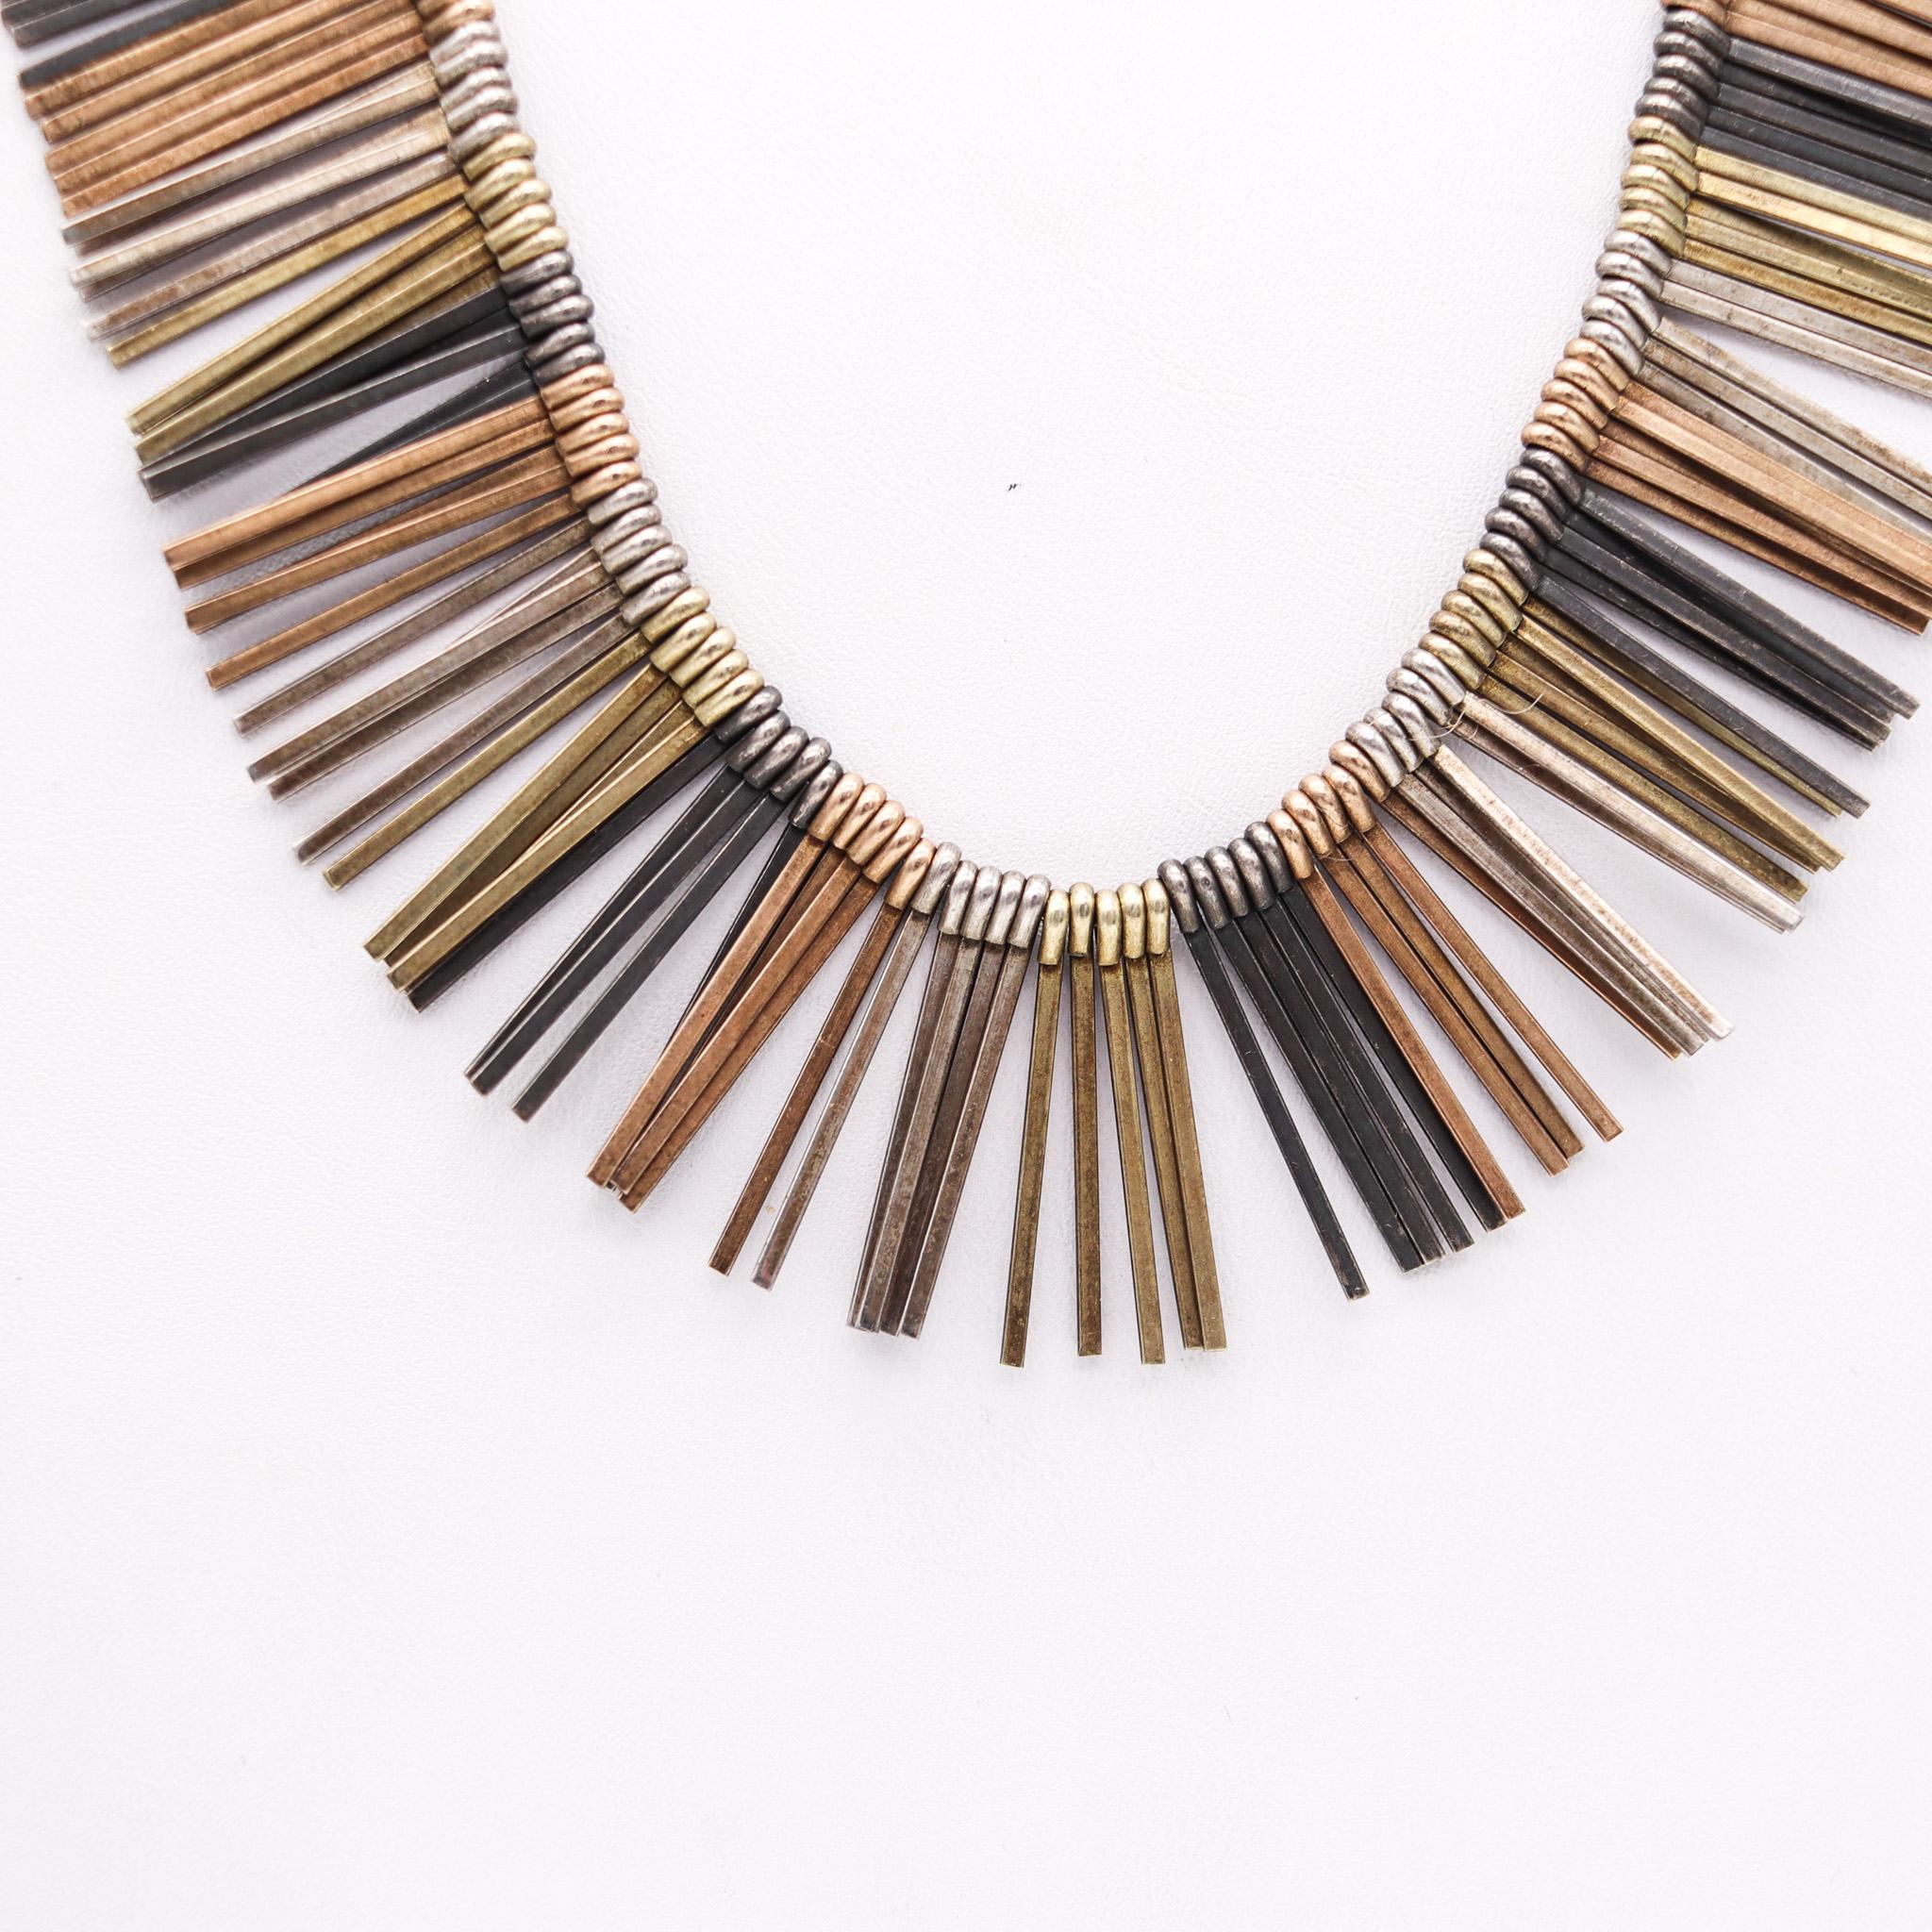 Fringe necklace designed by Eigil Jensen for Anton Michelsen.

Beautiful fringe necklace, created in Copenhagen Denmark, by the silversmith Eigil Jensen for Anton Michelsen, back in the 1960. Crafted as a flexible cascade of multiples tines, made up